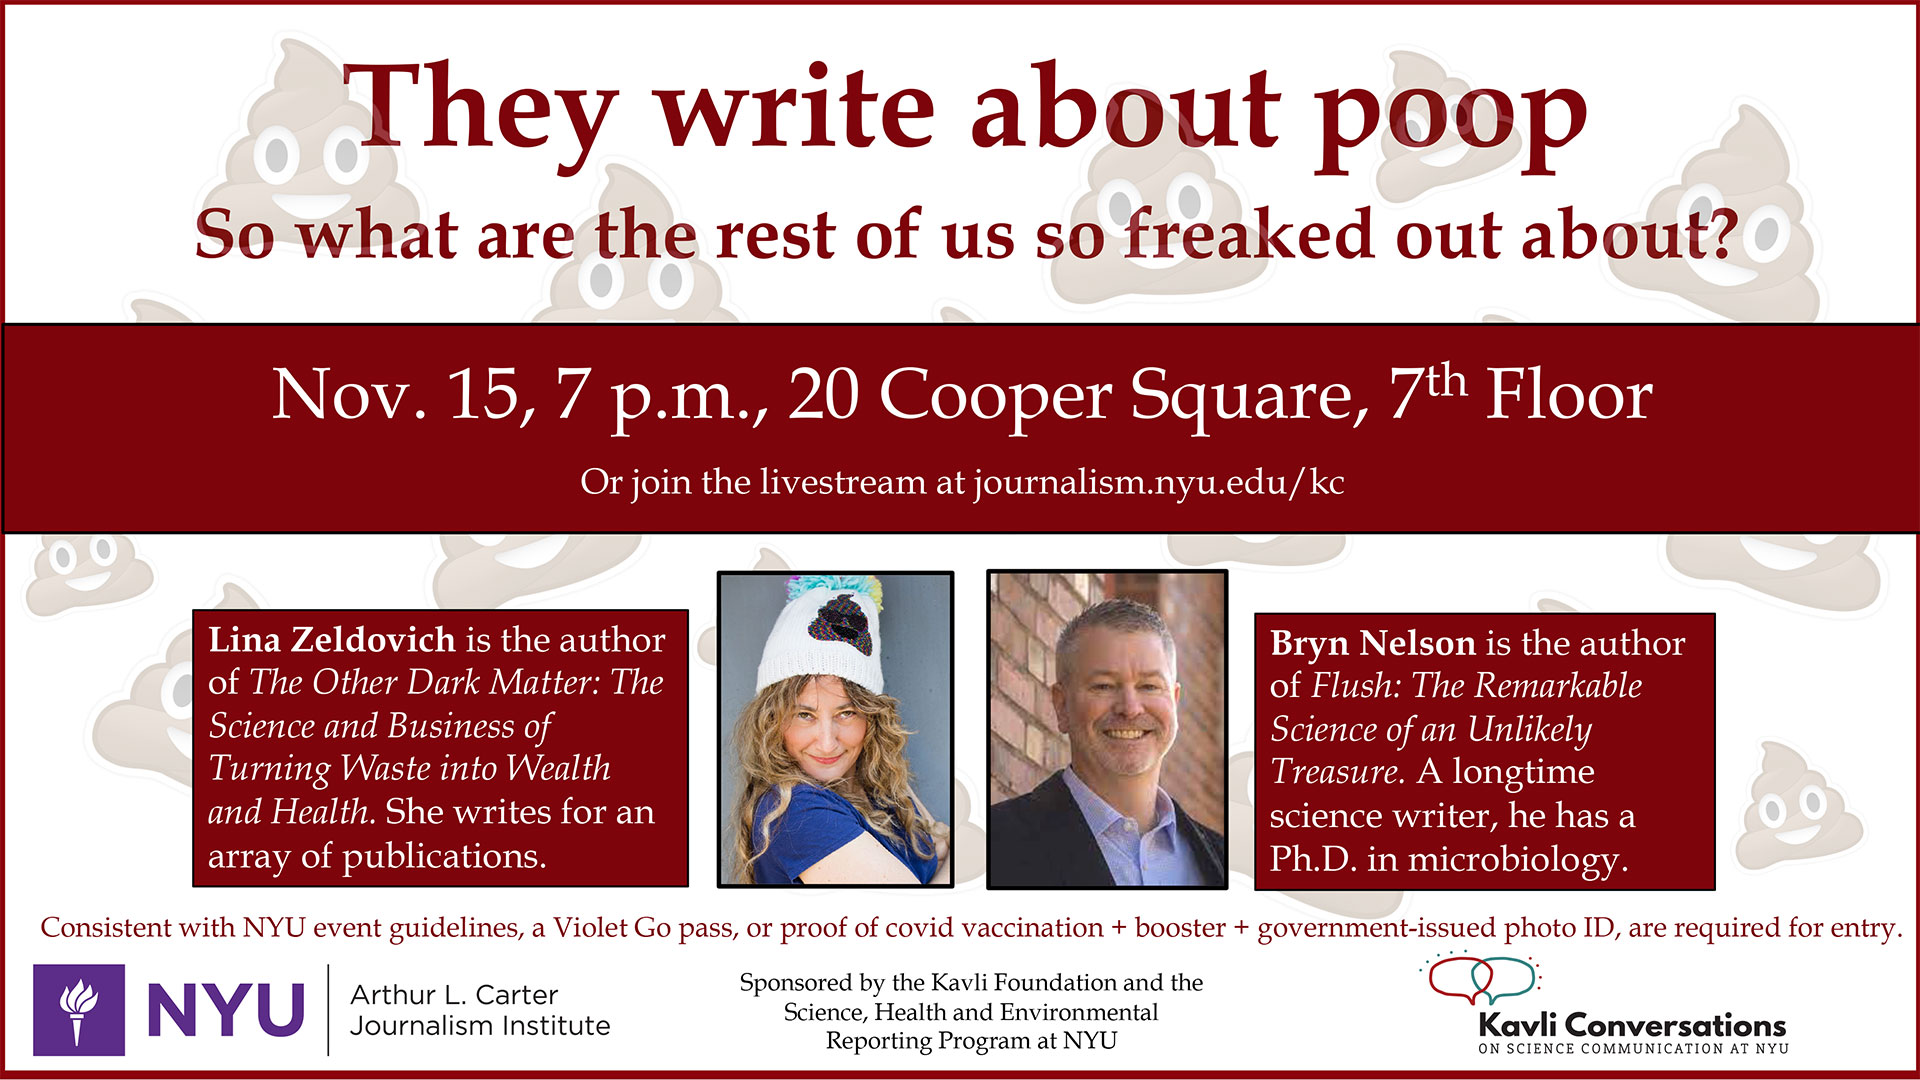 Event Poster - They write about poop: So what are the rest of us so freaked out about? - See event page for details